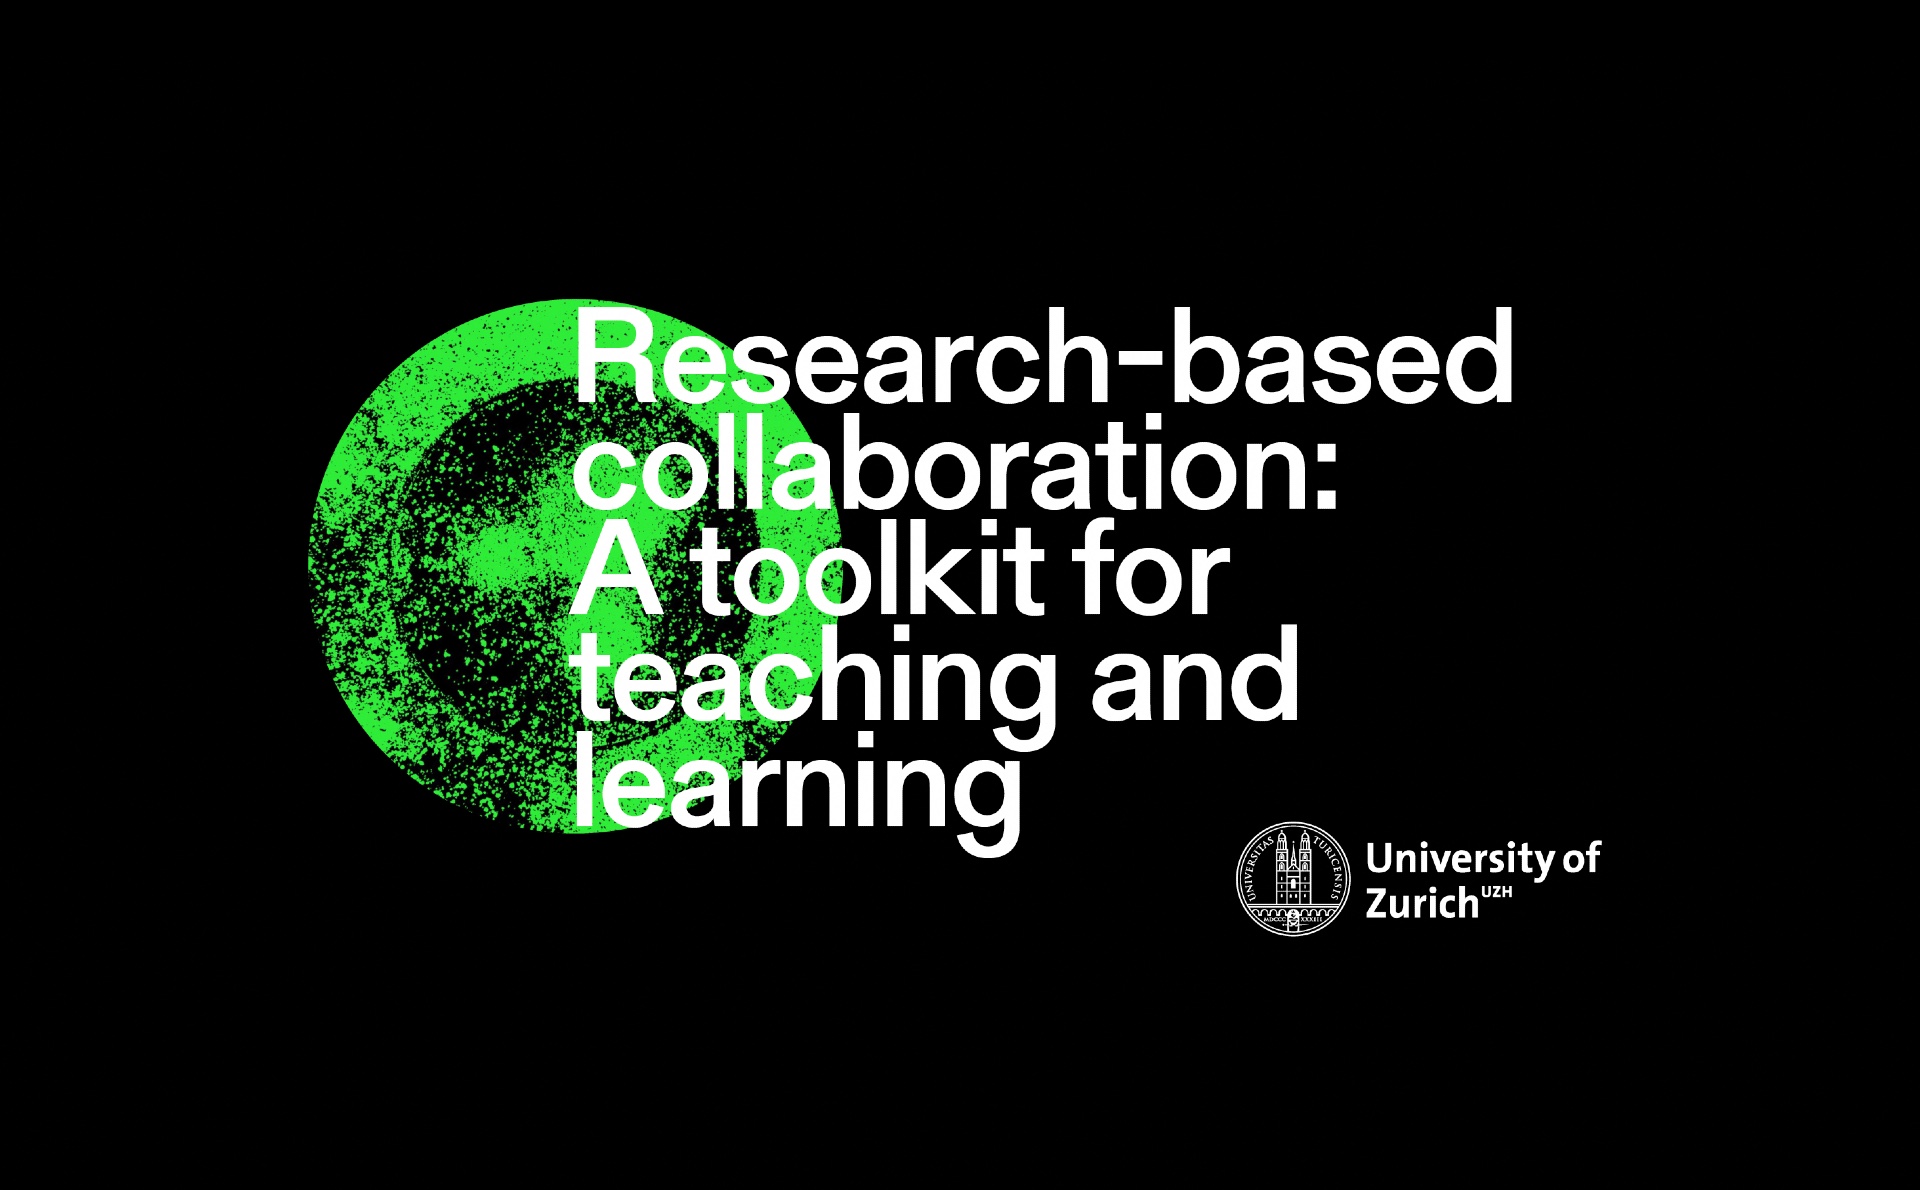 Toolkit for research-based collaboration